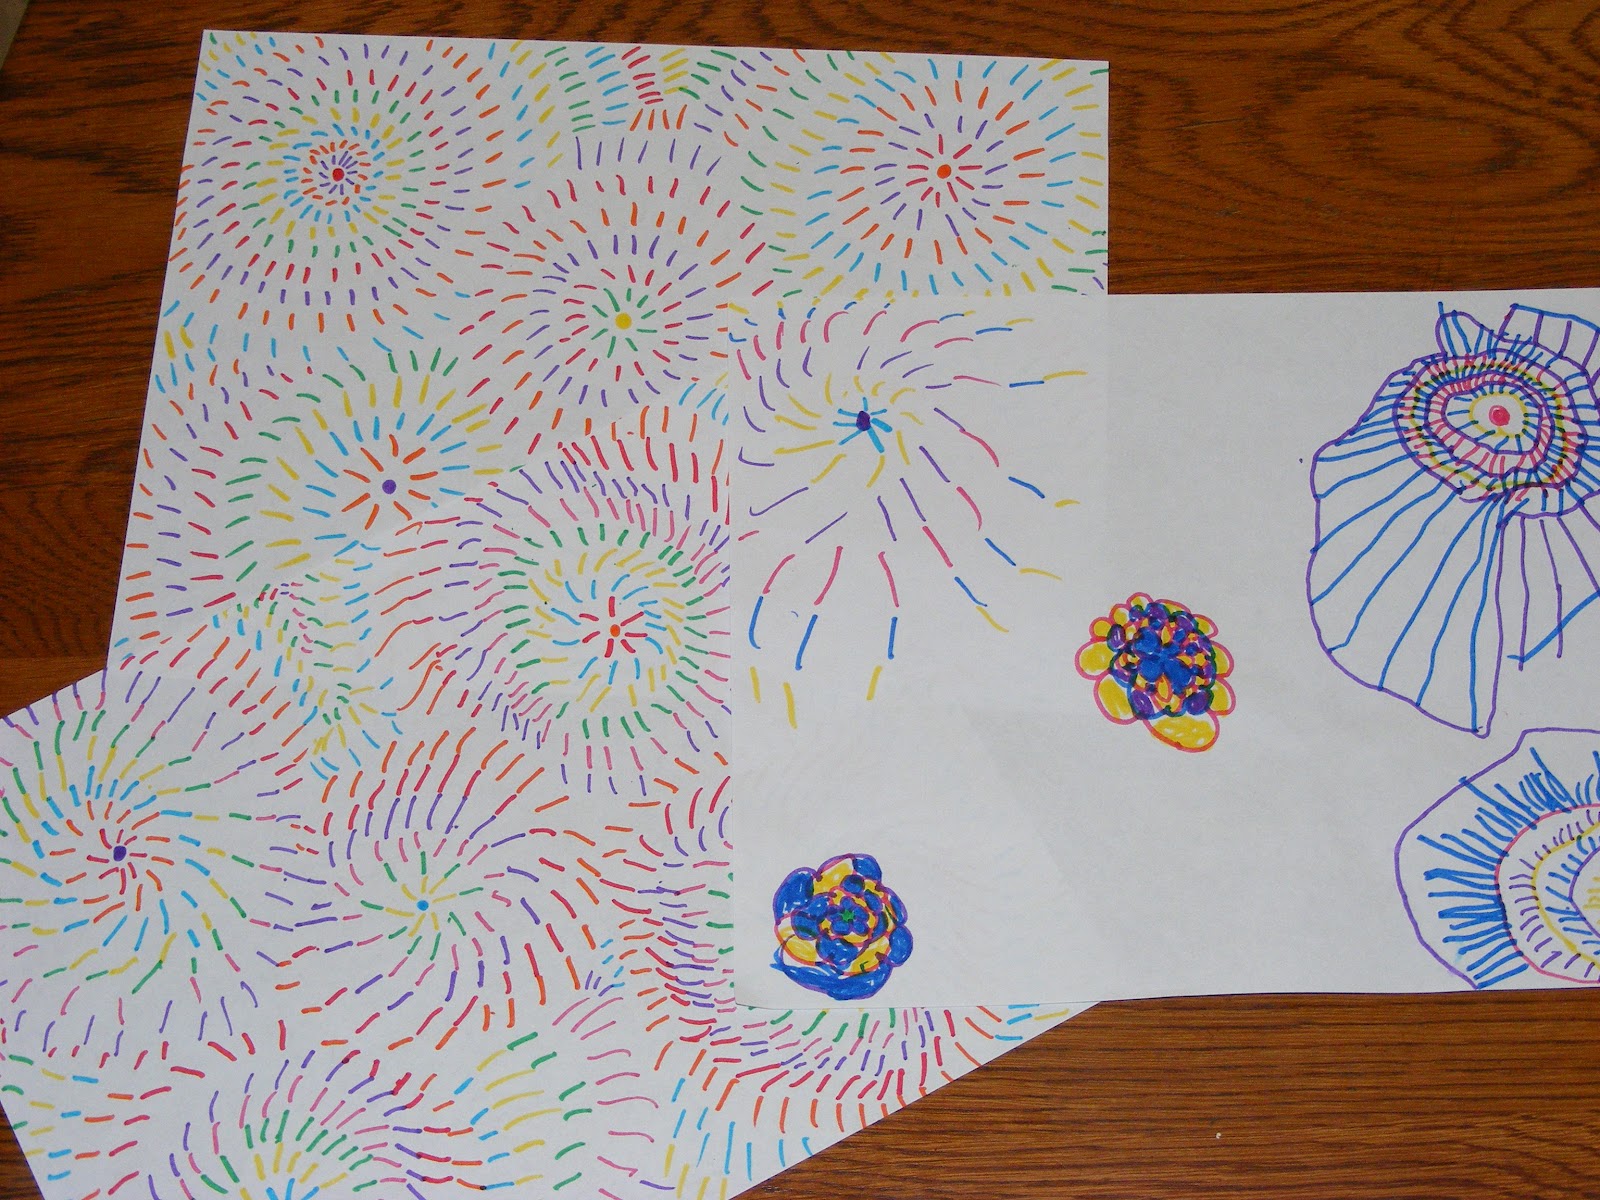 Ten kids and a Dog: Easy Art--Firework drawings